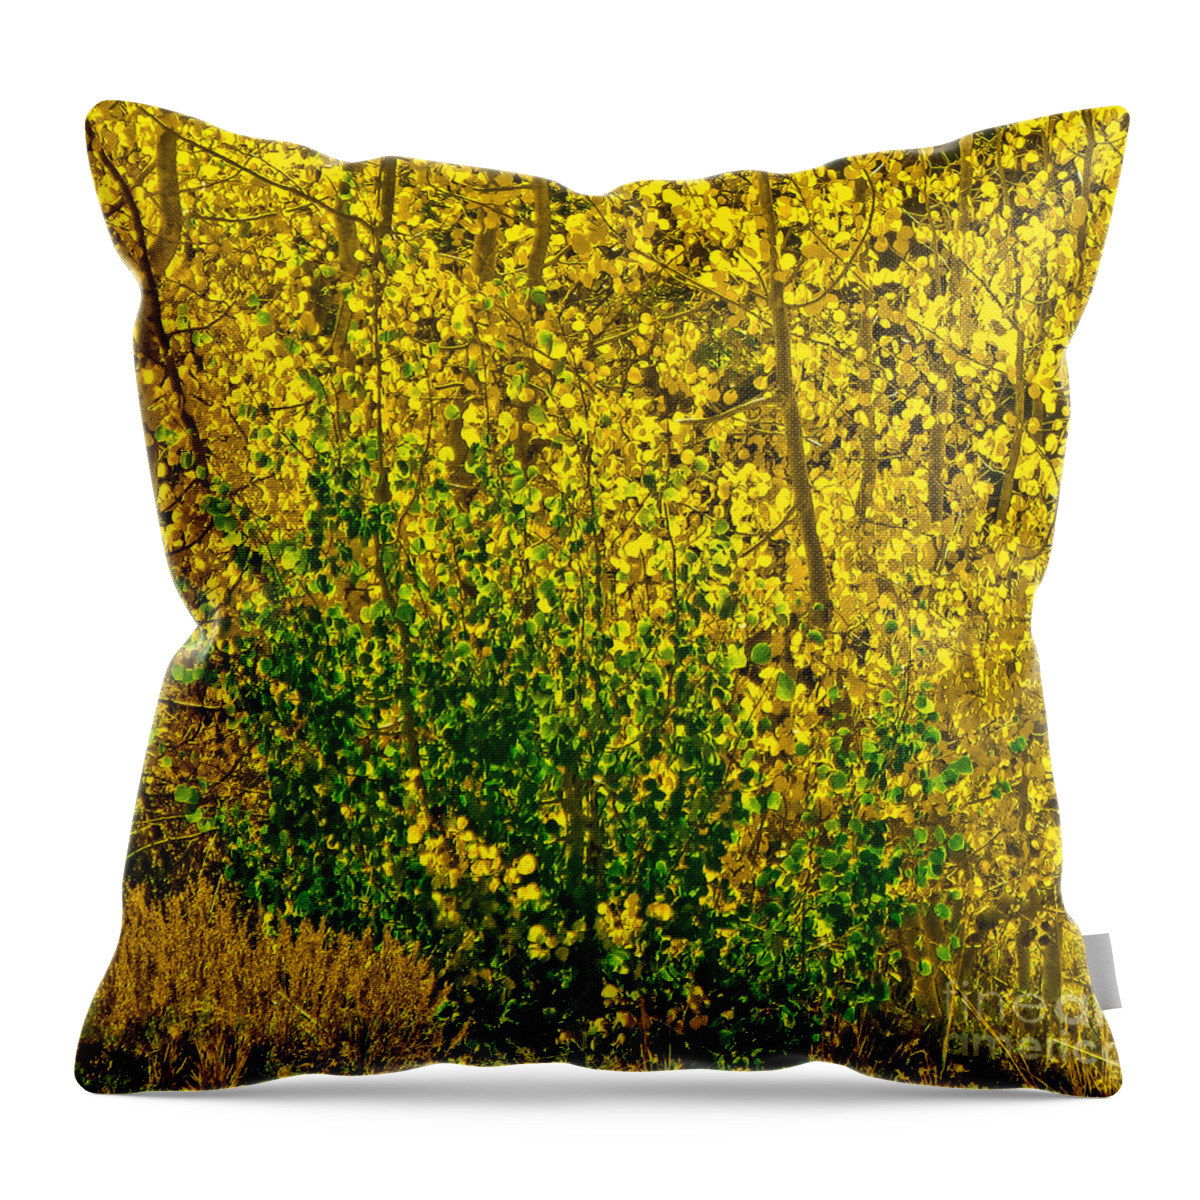 Aspen Leaves Throw Pillow featuring the photograph The Turn by L J Oakes